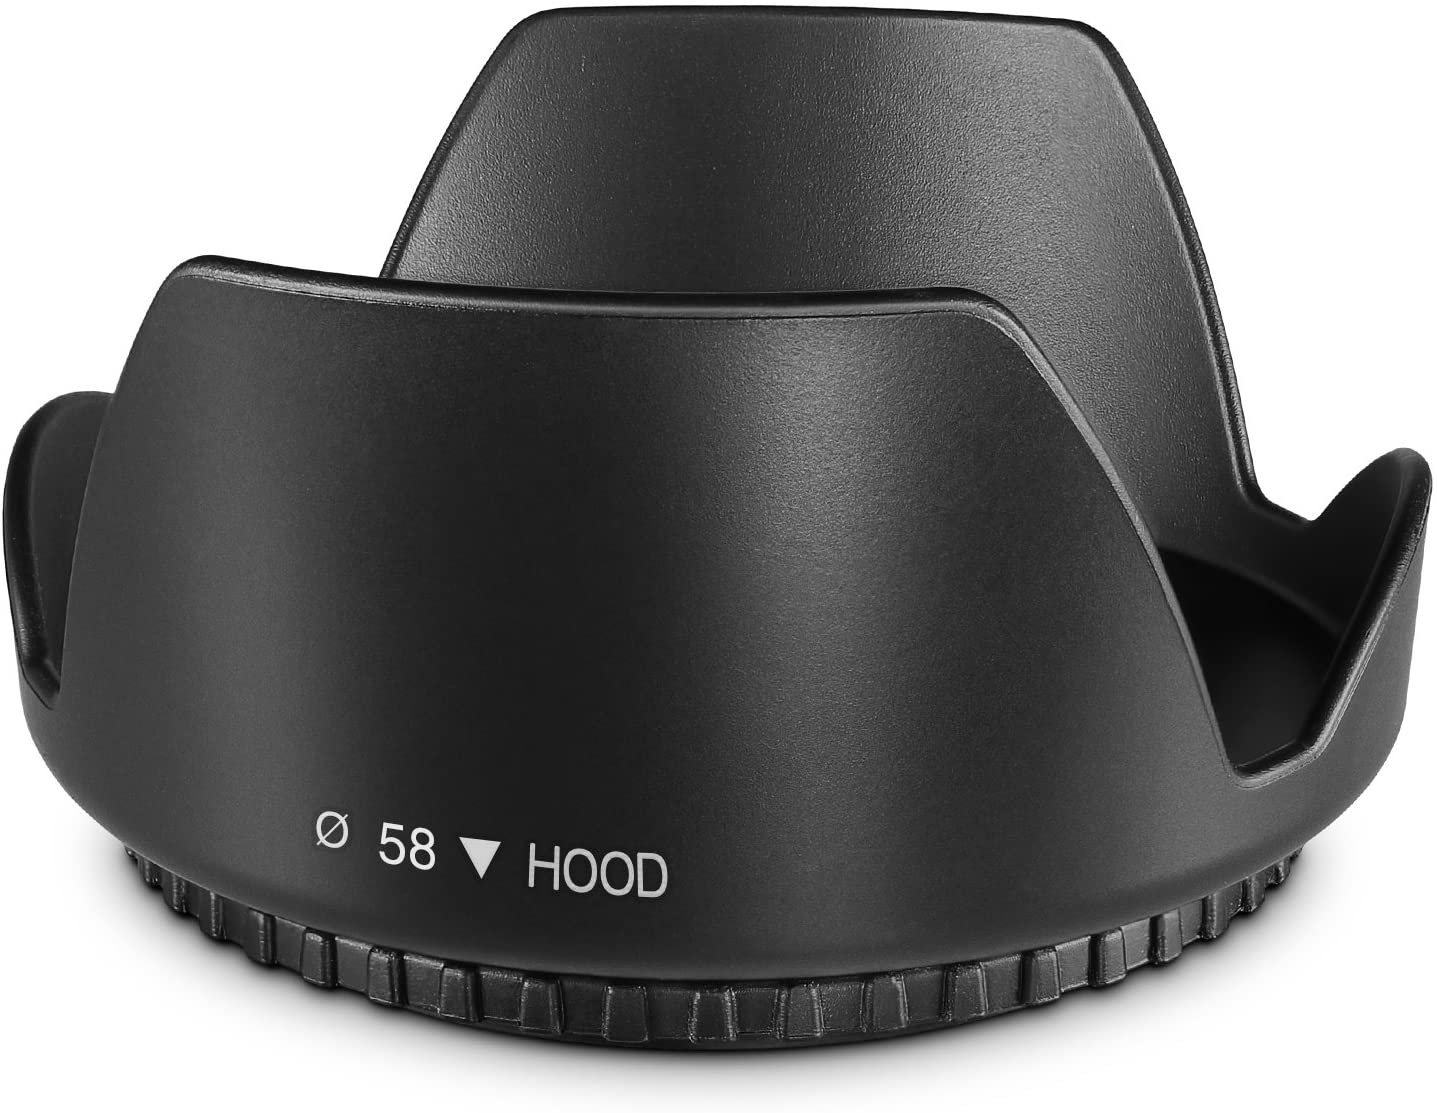 lens hood for photography